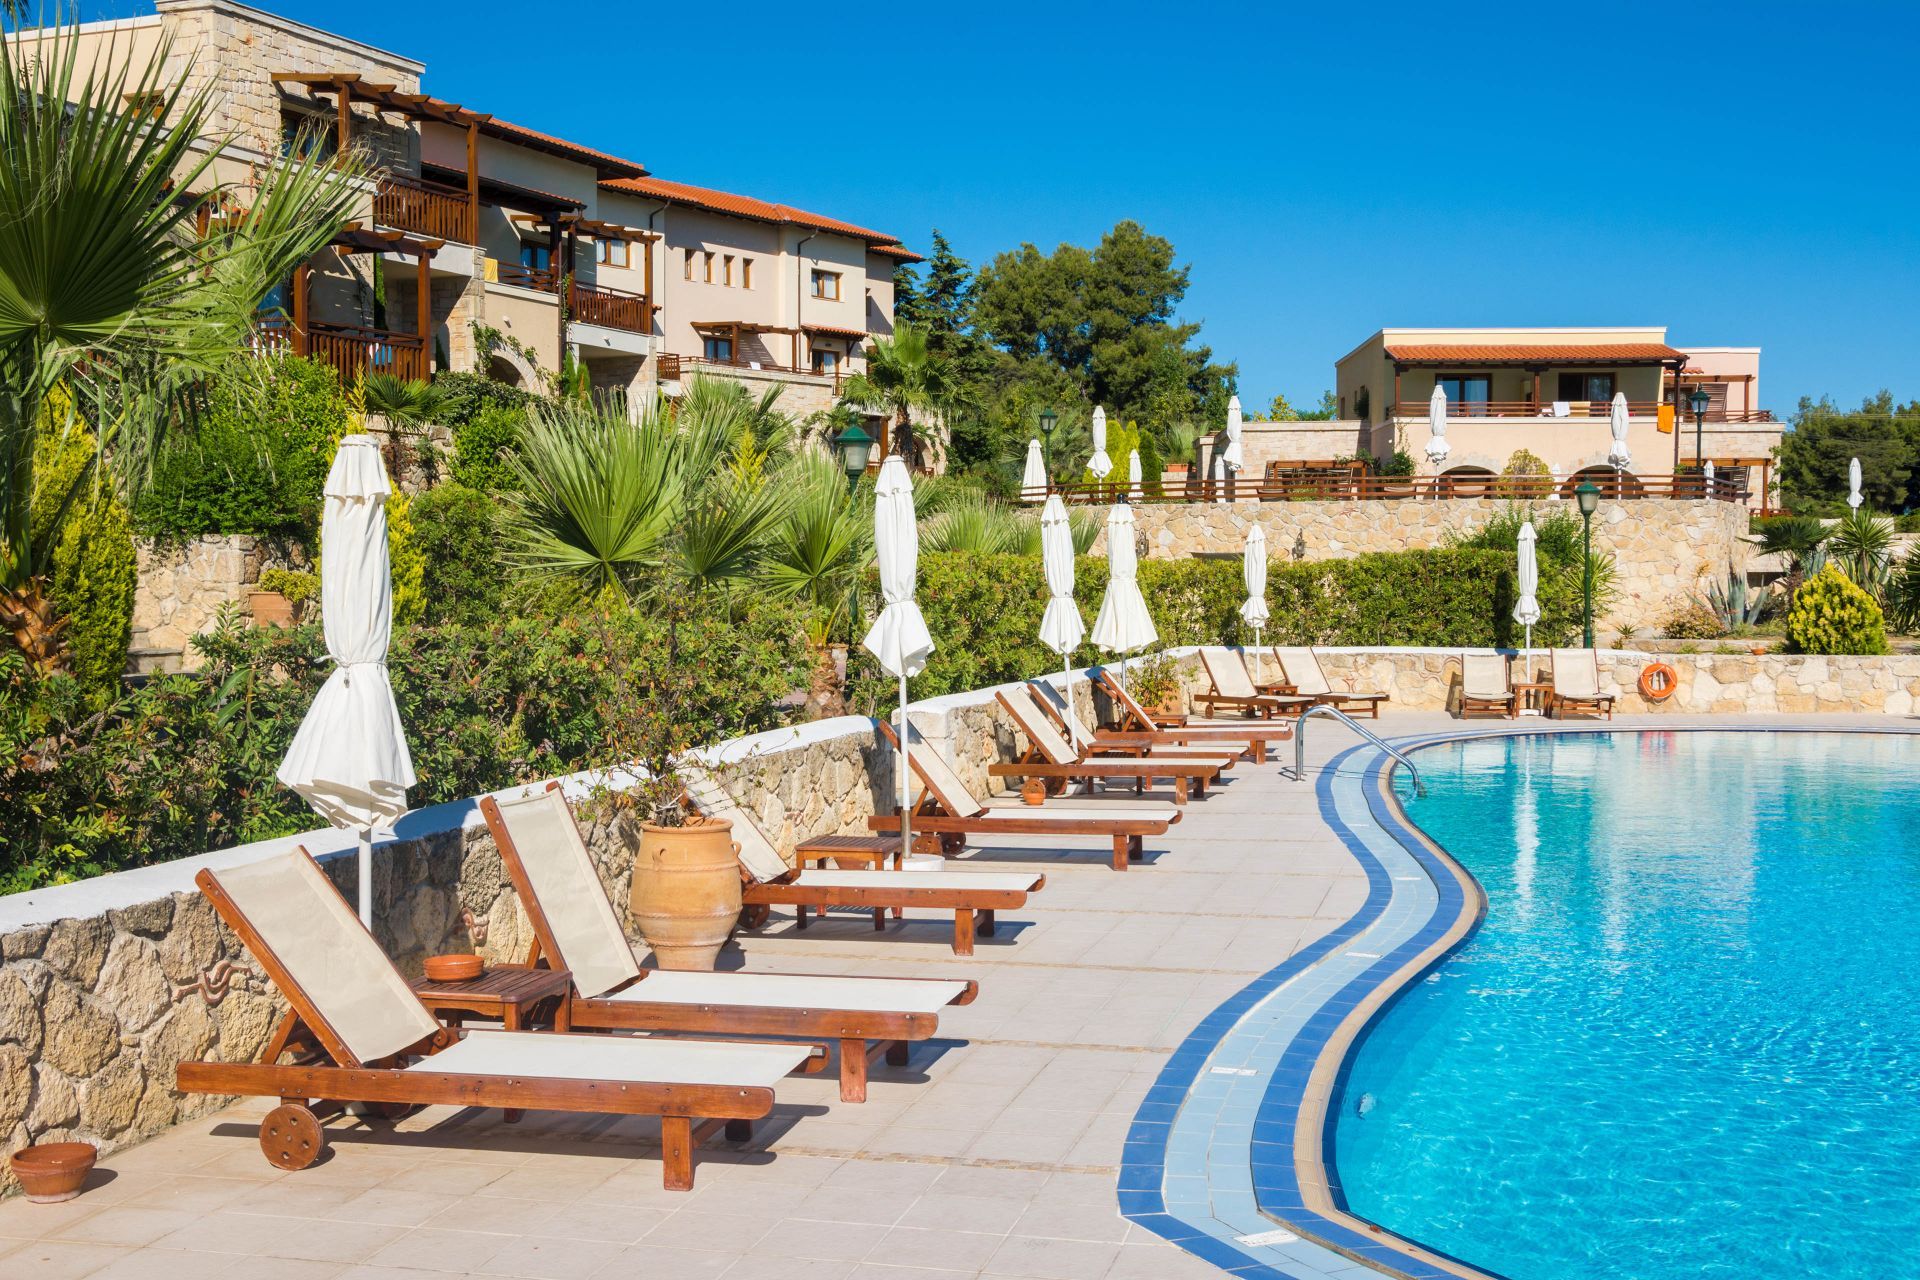 Accommodation and hotels in Halkidiki